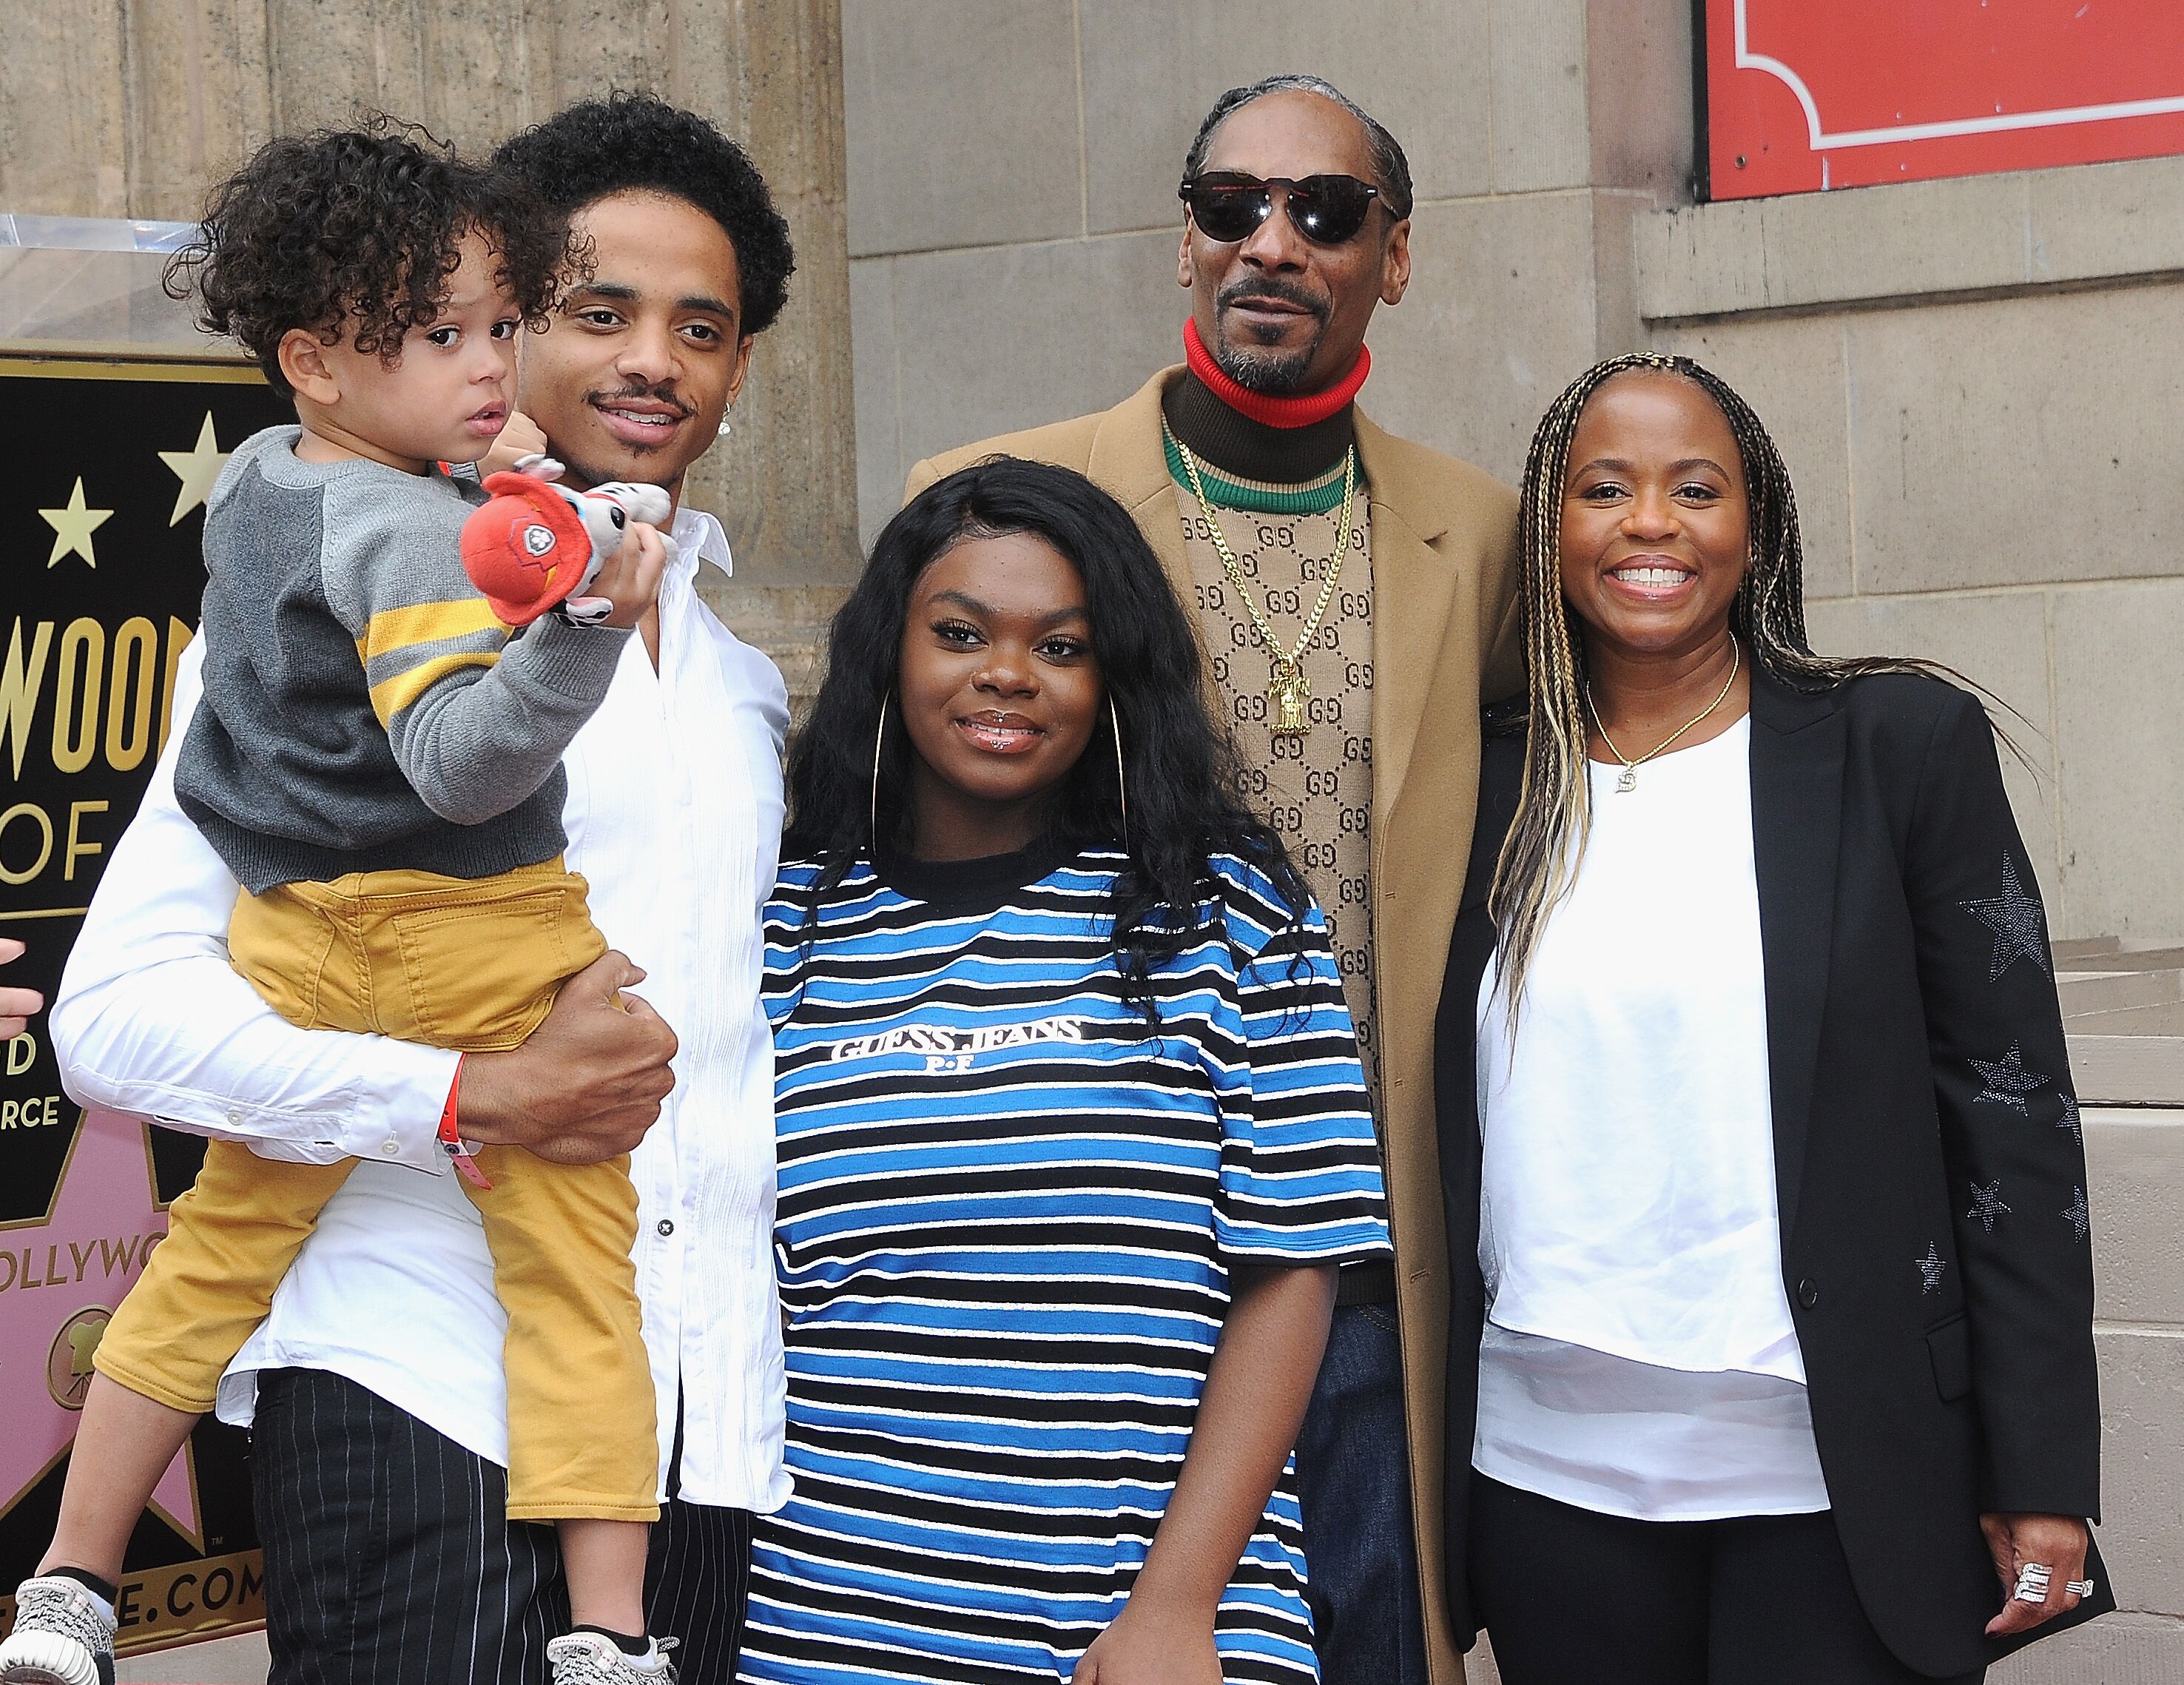 The Broadus family celebrating Snoops' Hollywood Walk of Fame star | Source: Getty Images/GlobalImagesUkraine